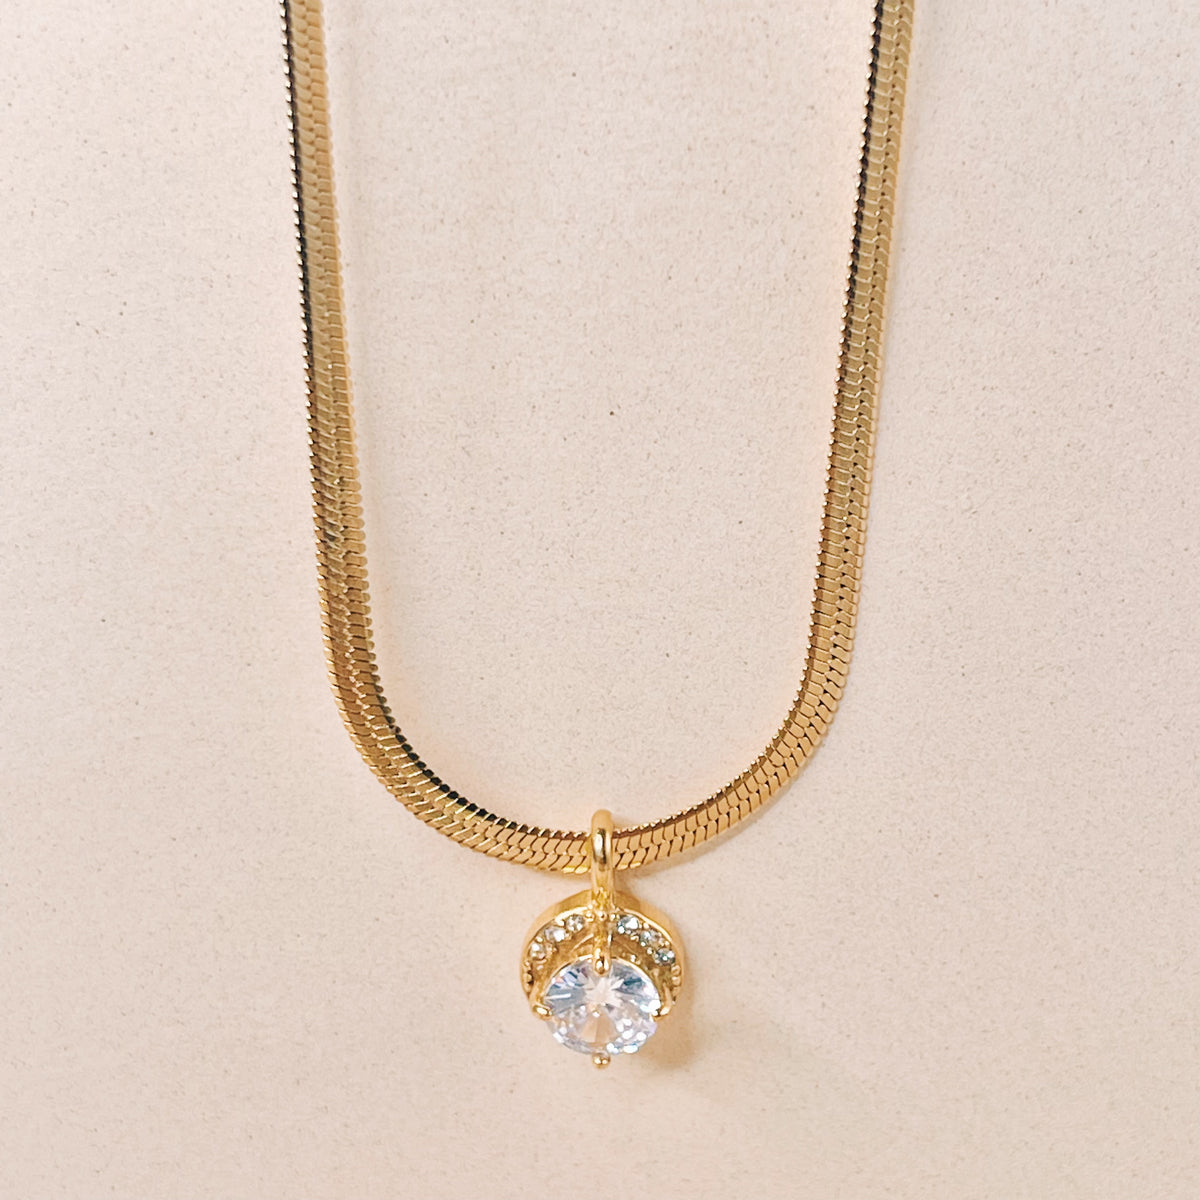 Adeline Crowned Zircon Pendant Snake Chain Gold Necklace